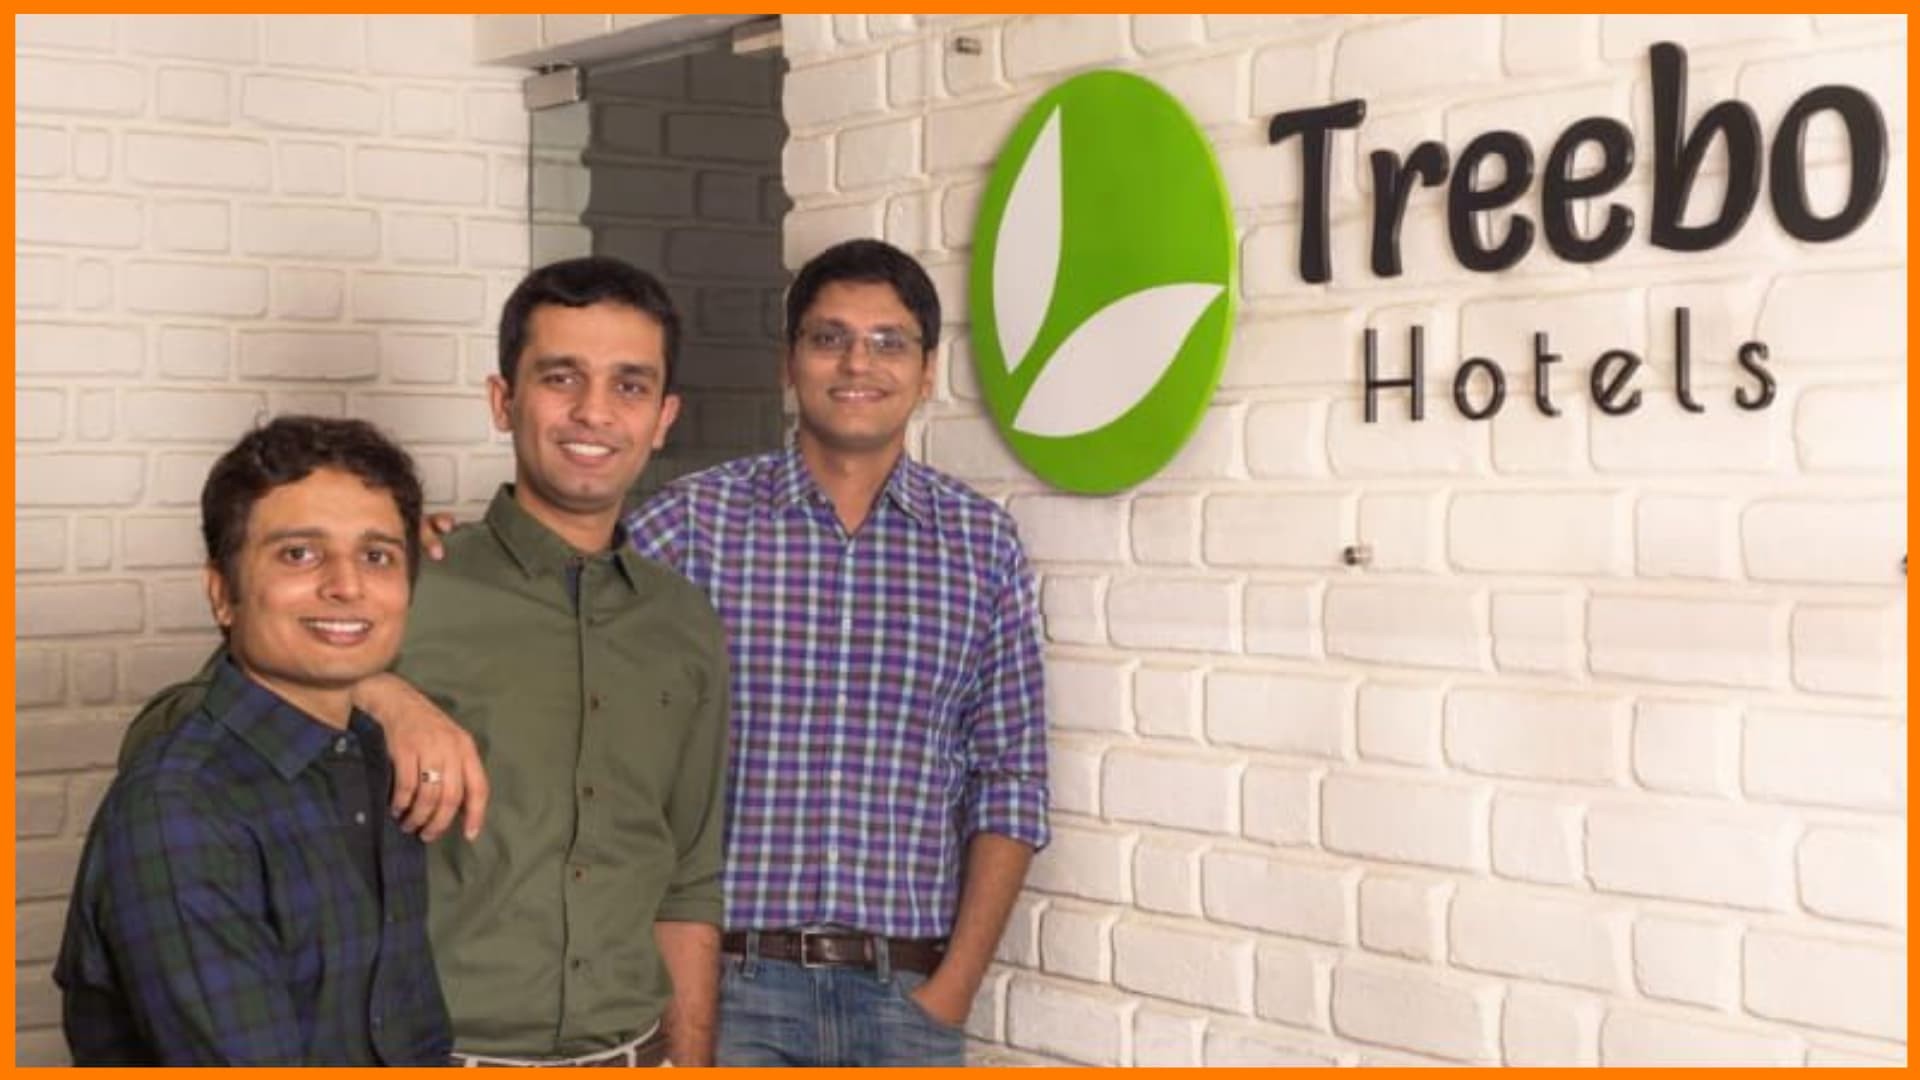 SWOT Analysis of Treebo Hotels - The Founders of Treebo Hotels